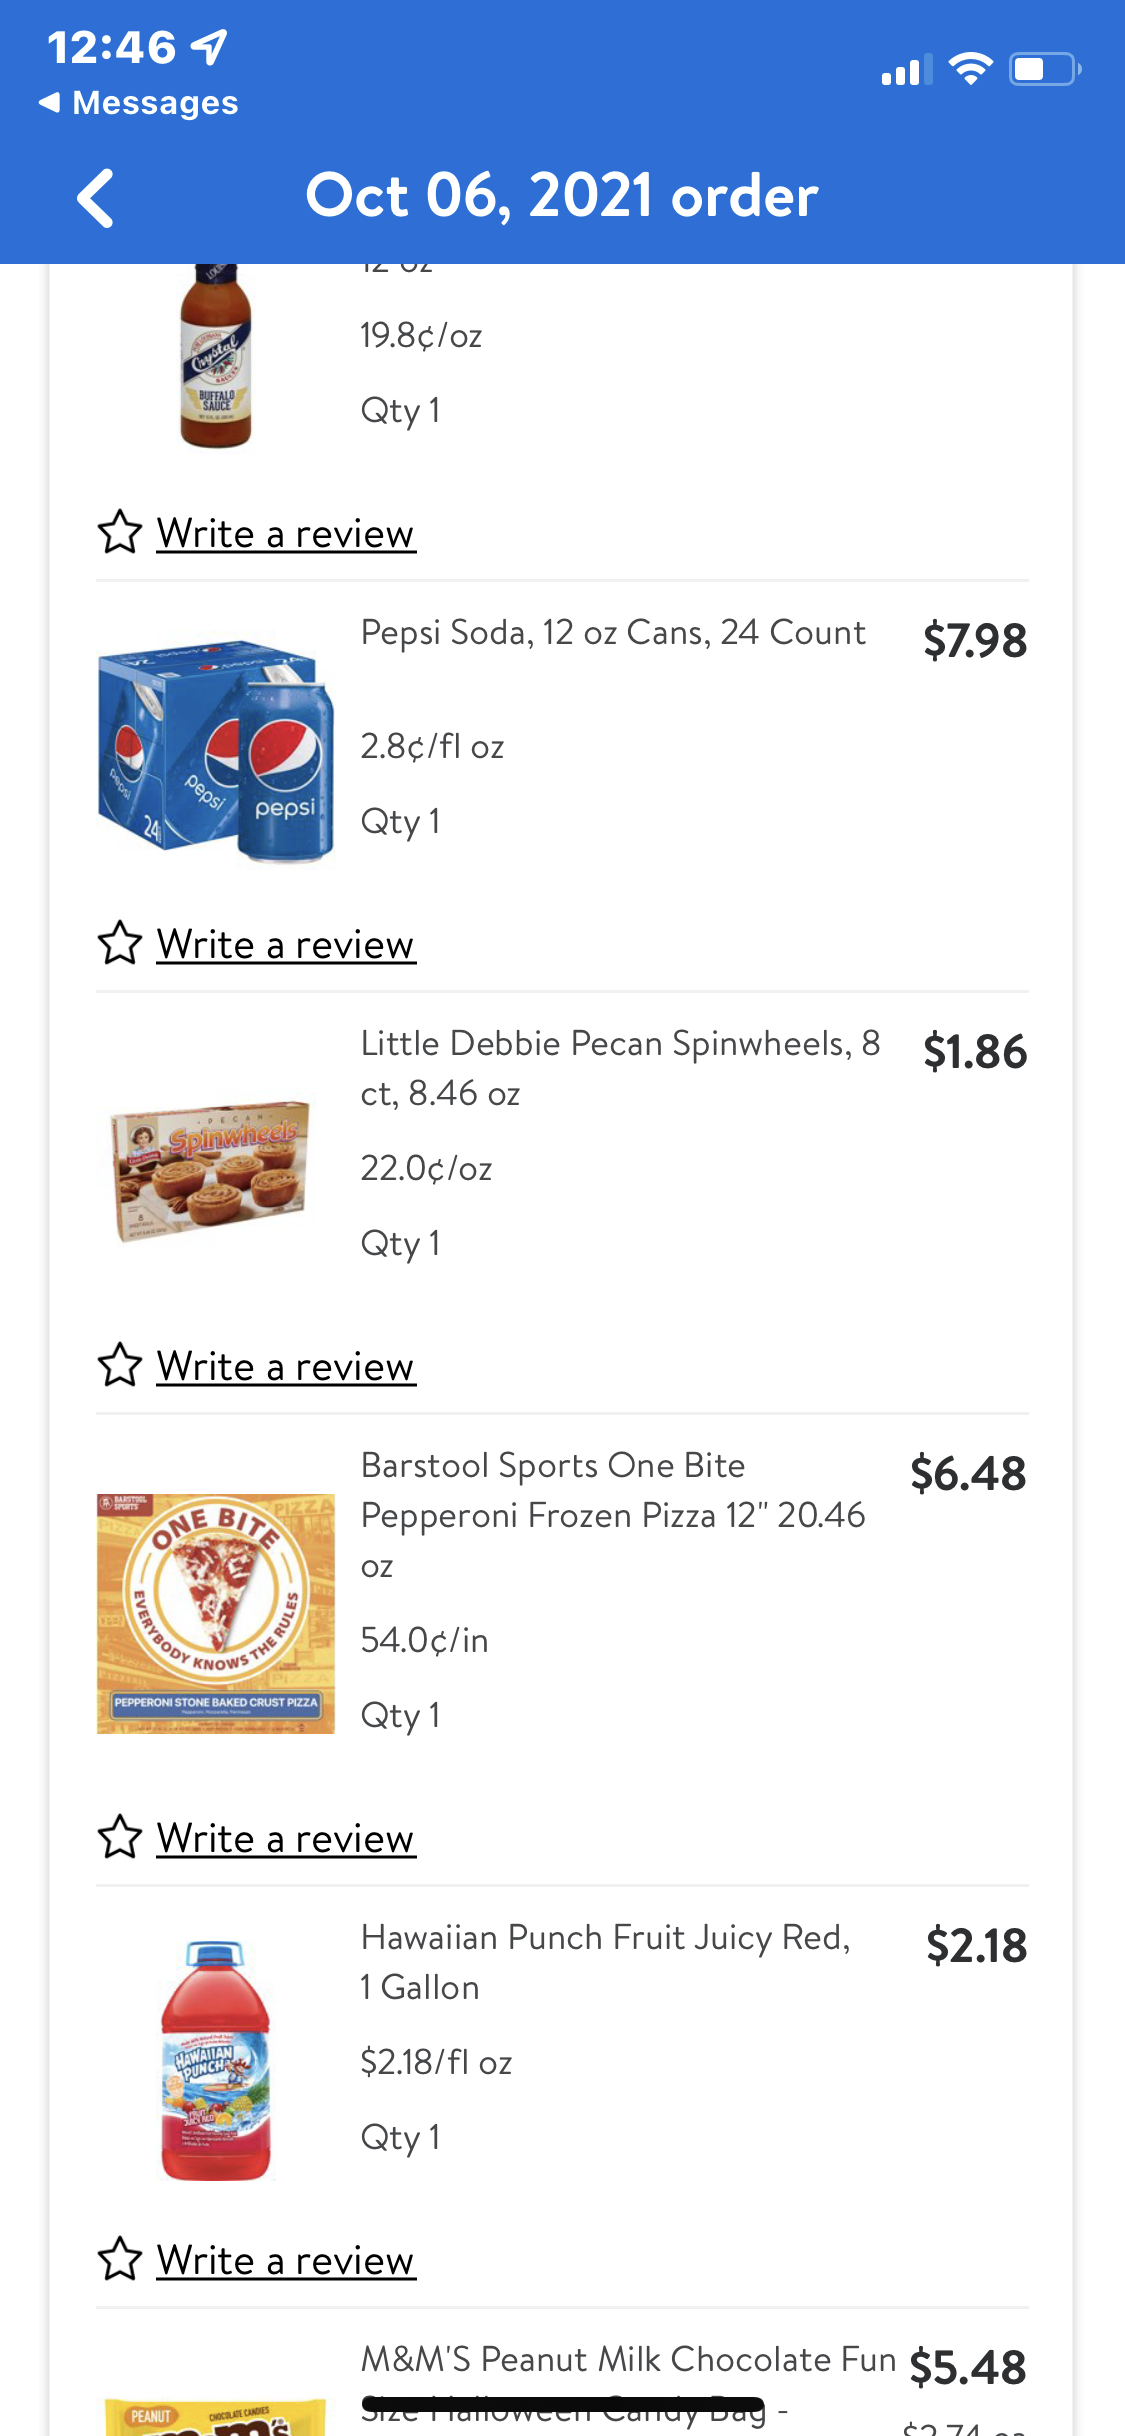 Walmart Grocery Delivery Reviews - 23 Reviews of Grocery.walmart